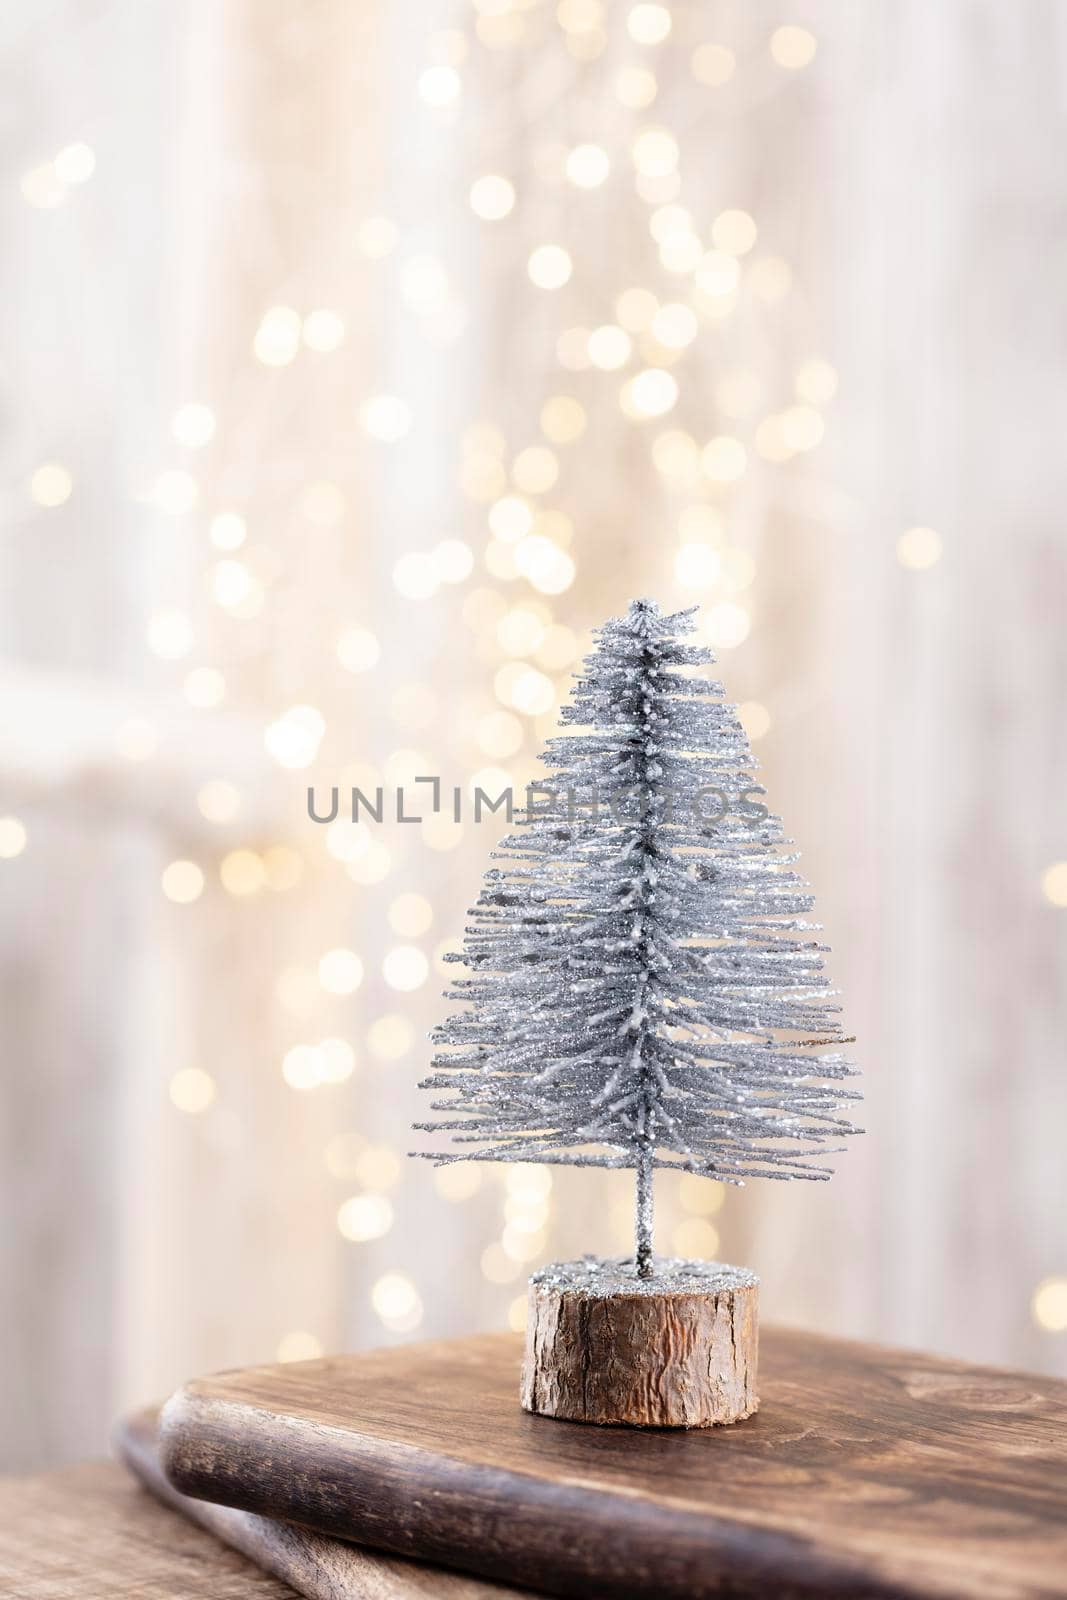 Christmas tree on wooden, bokeh background. Christmas holiday celebration concept. Greeting card.